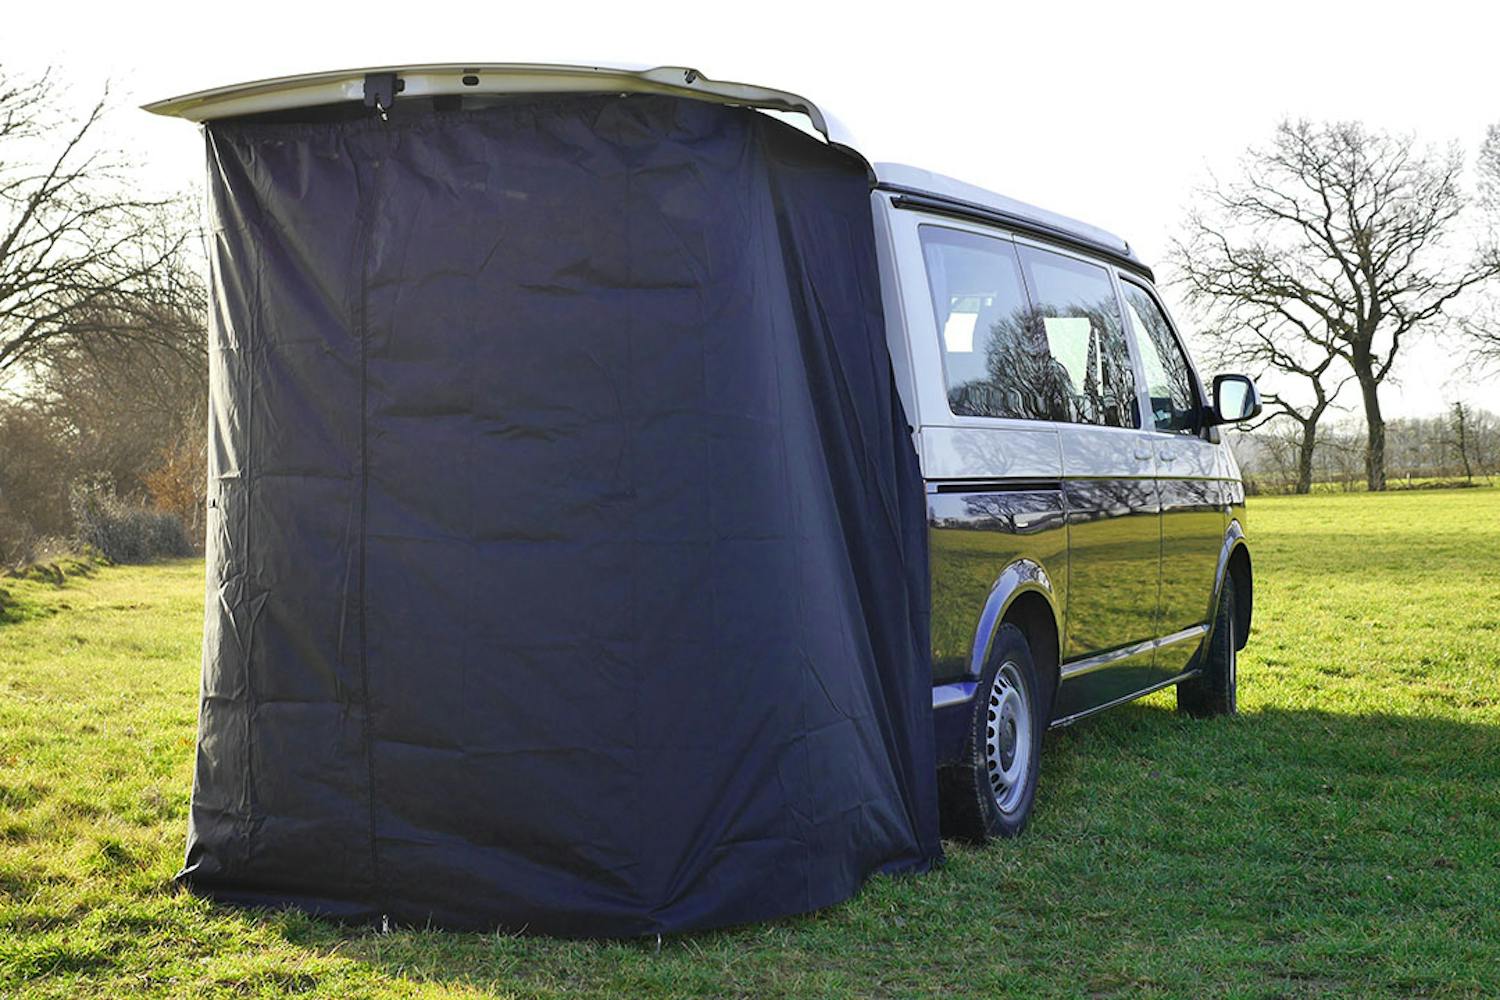 SpaceCamper Tailgate Tent for VW T6.1, T6 and T5